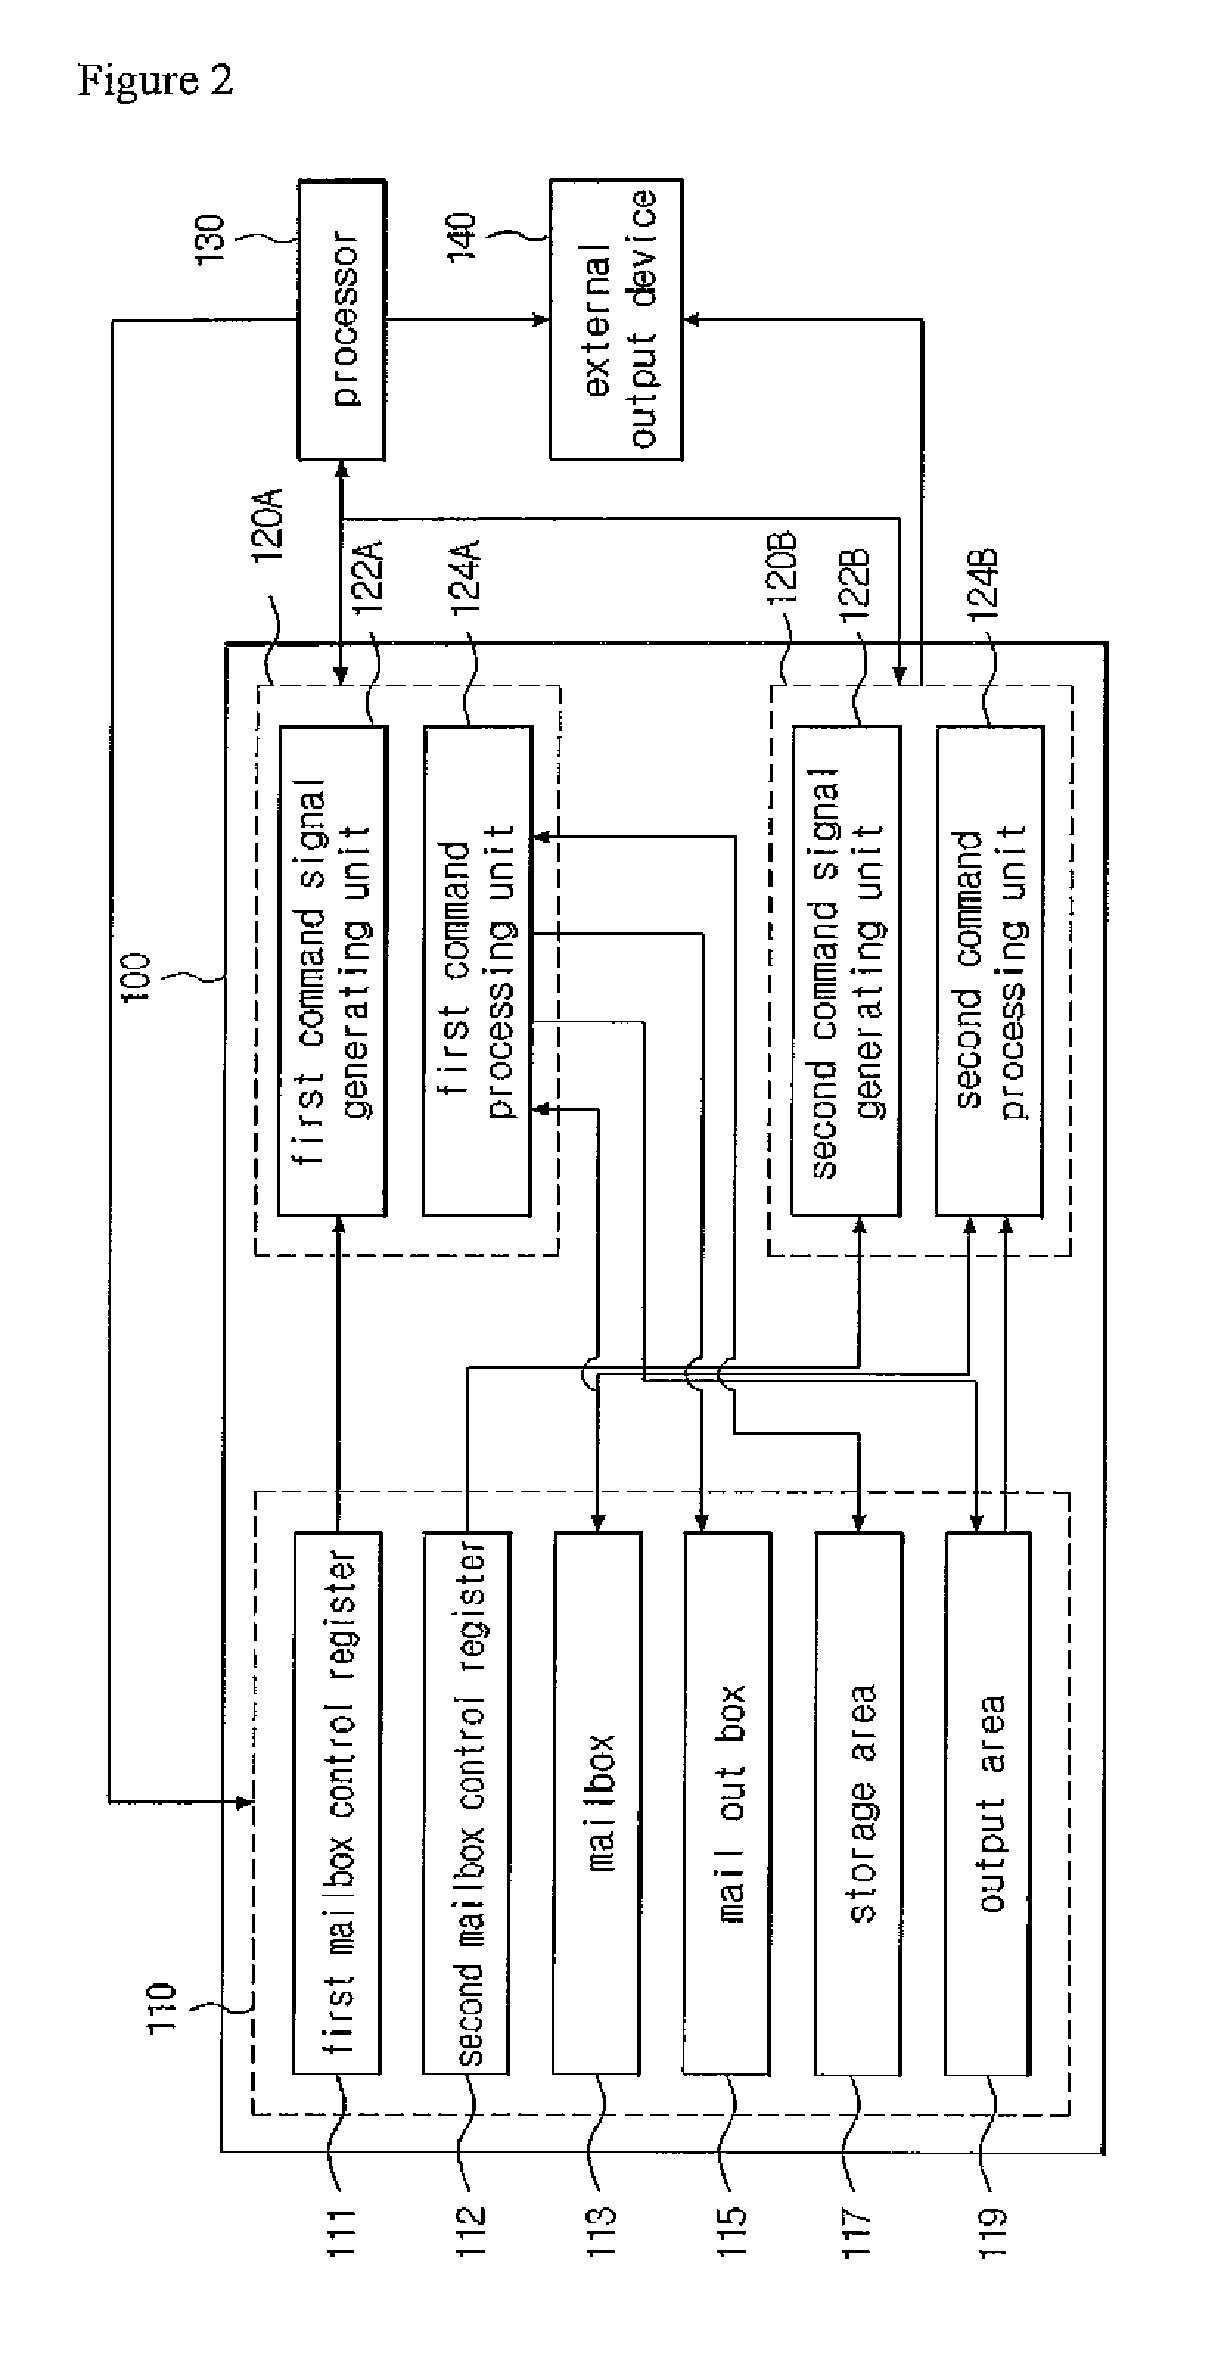 Memory device having data processing function